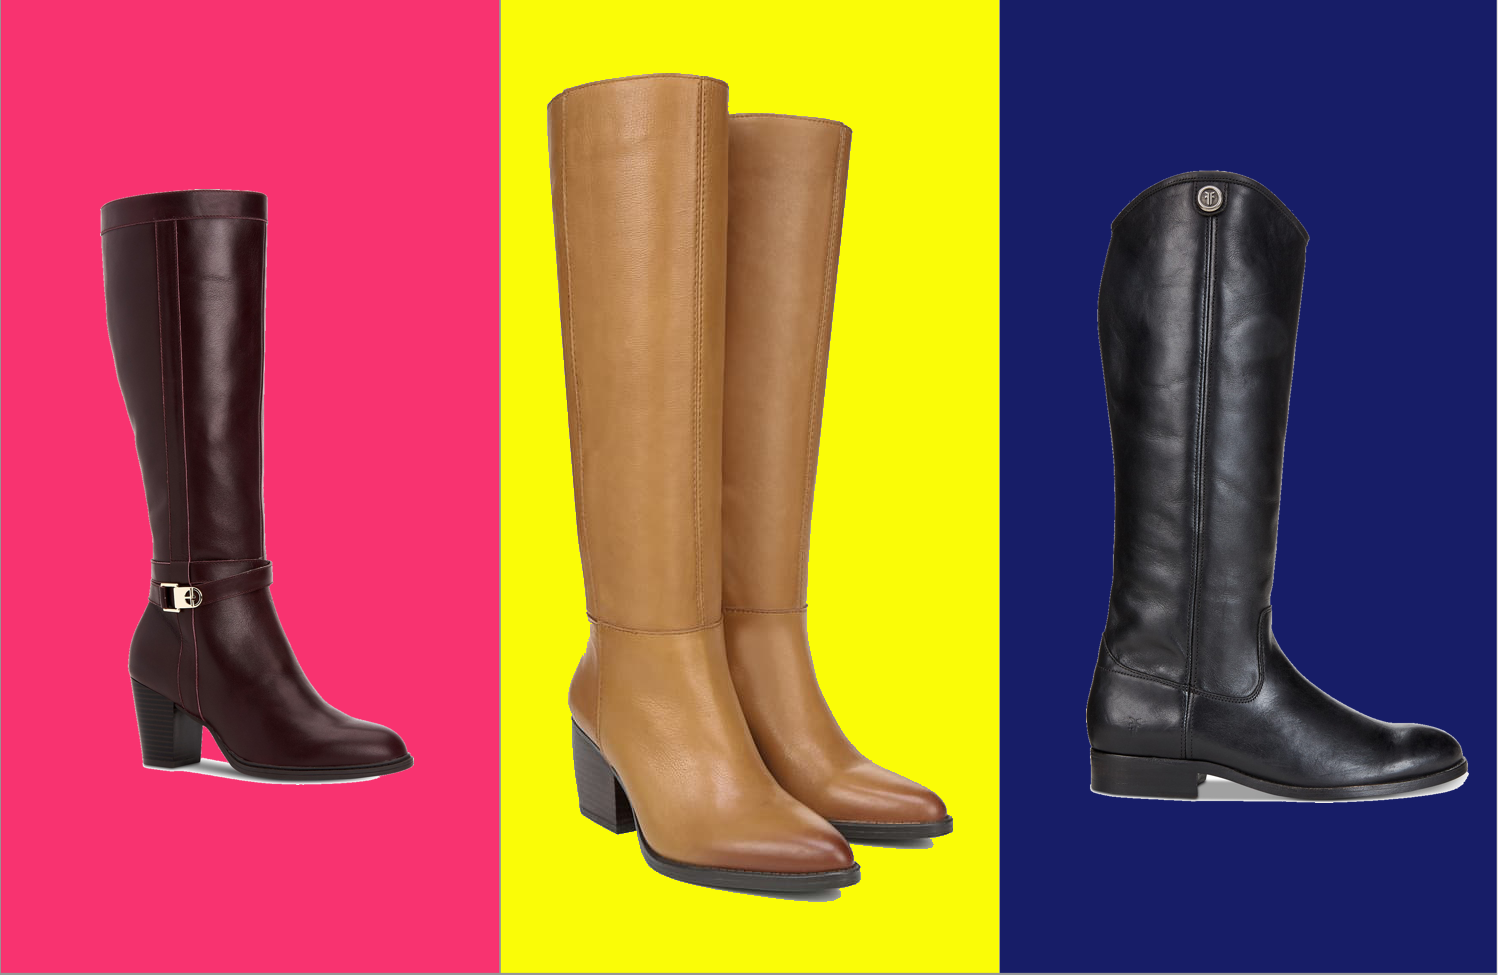 Best Knee-High Boots For Wide Calves 